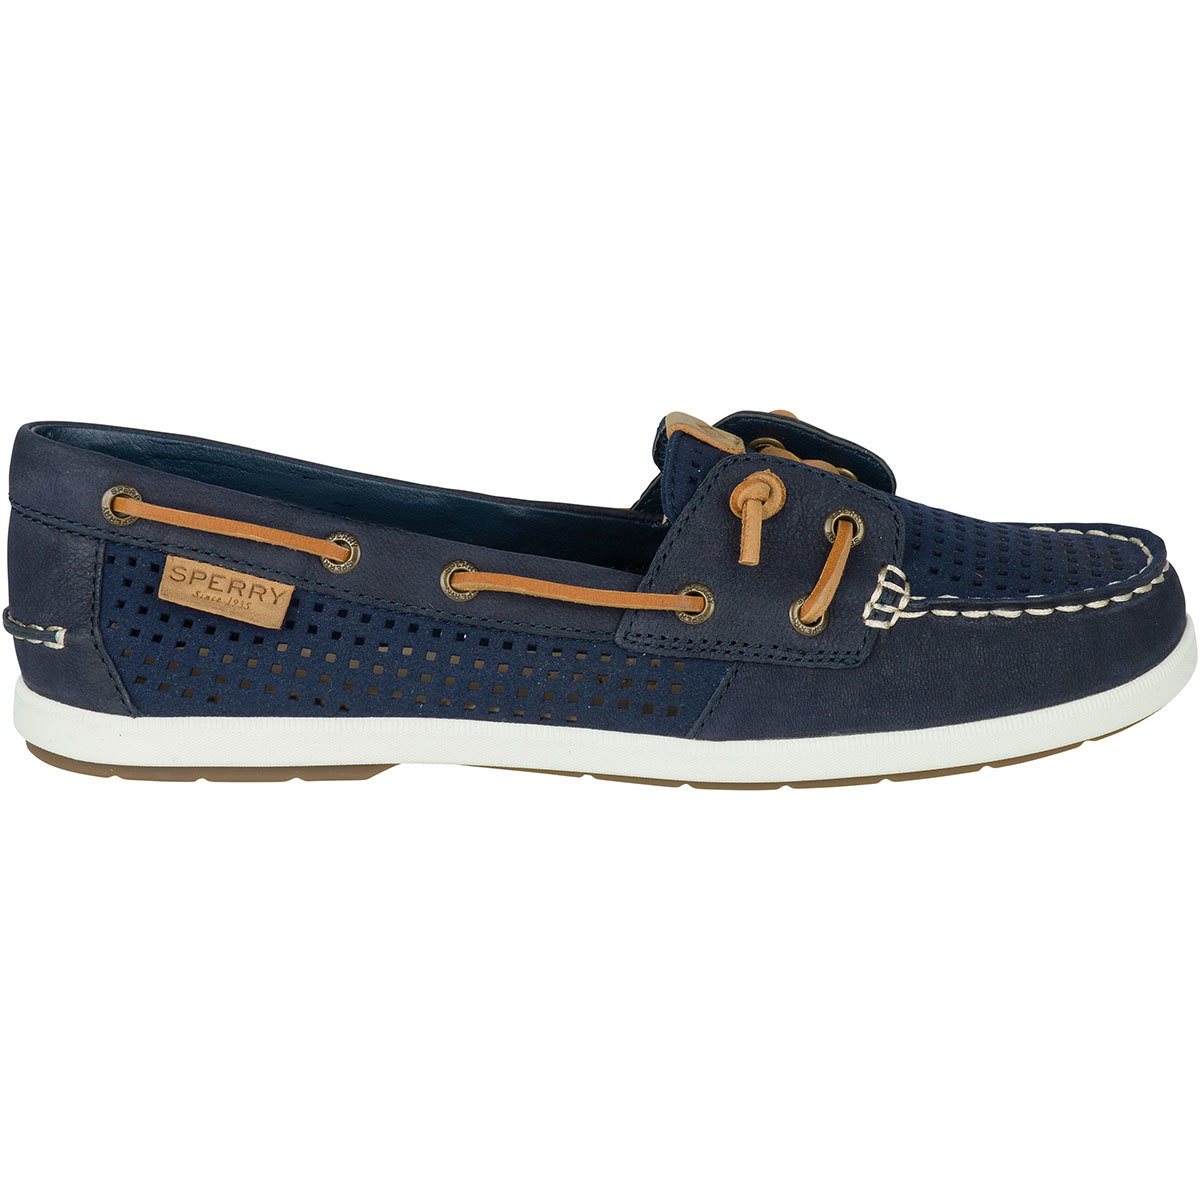 sperry shoes navy blue